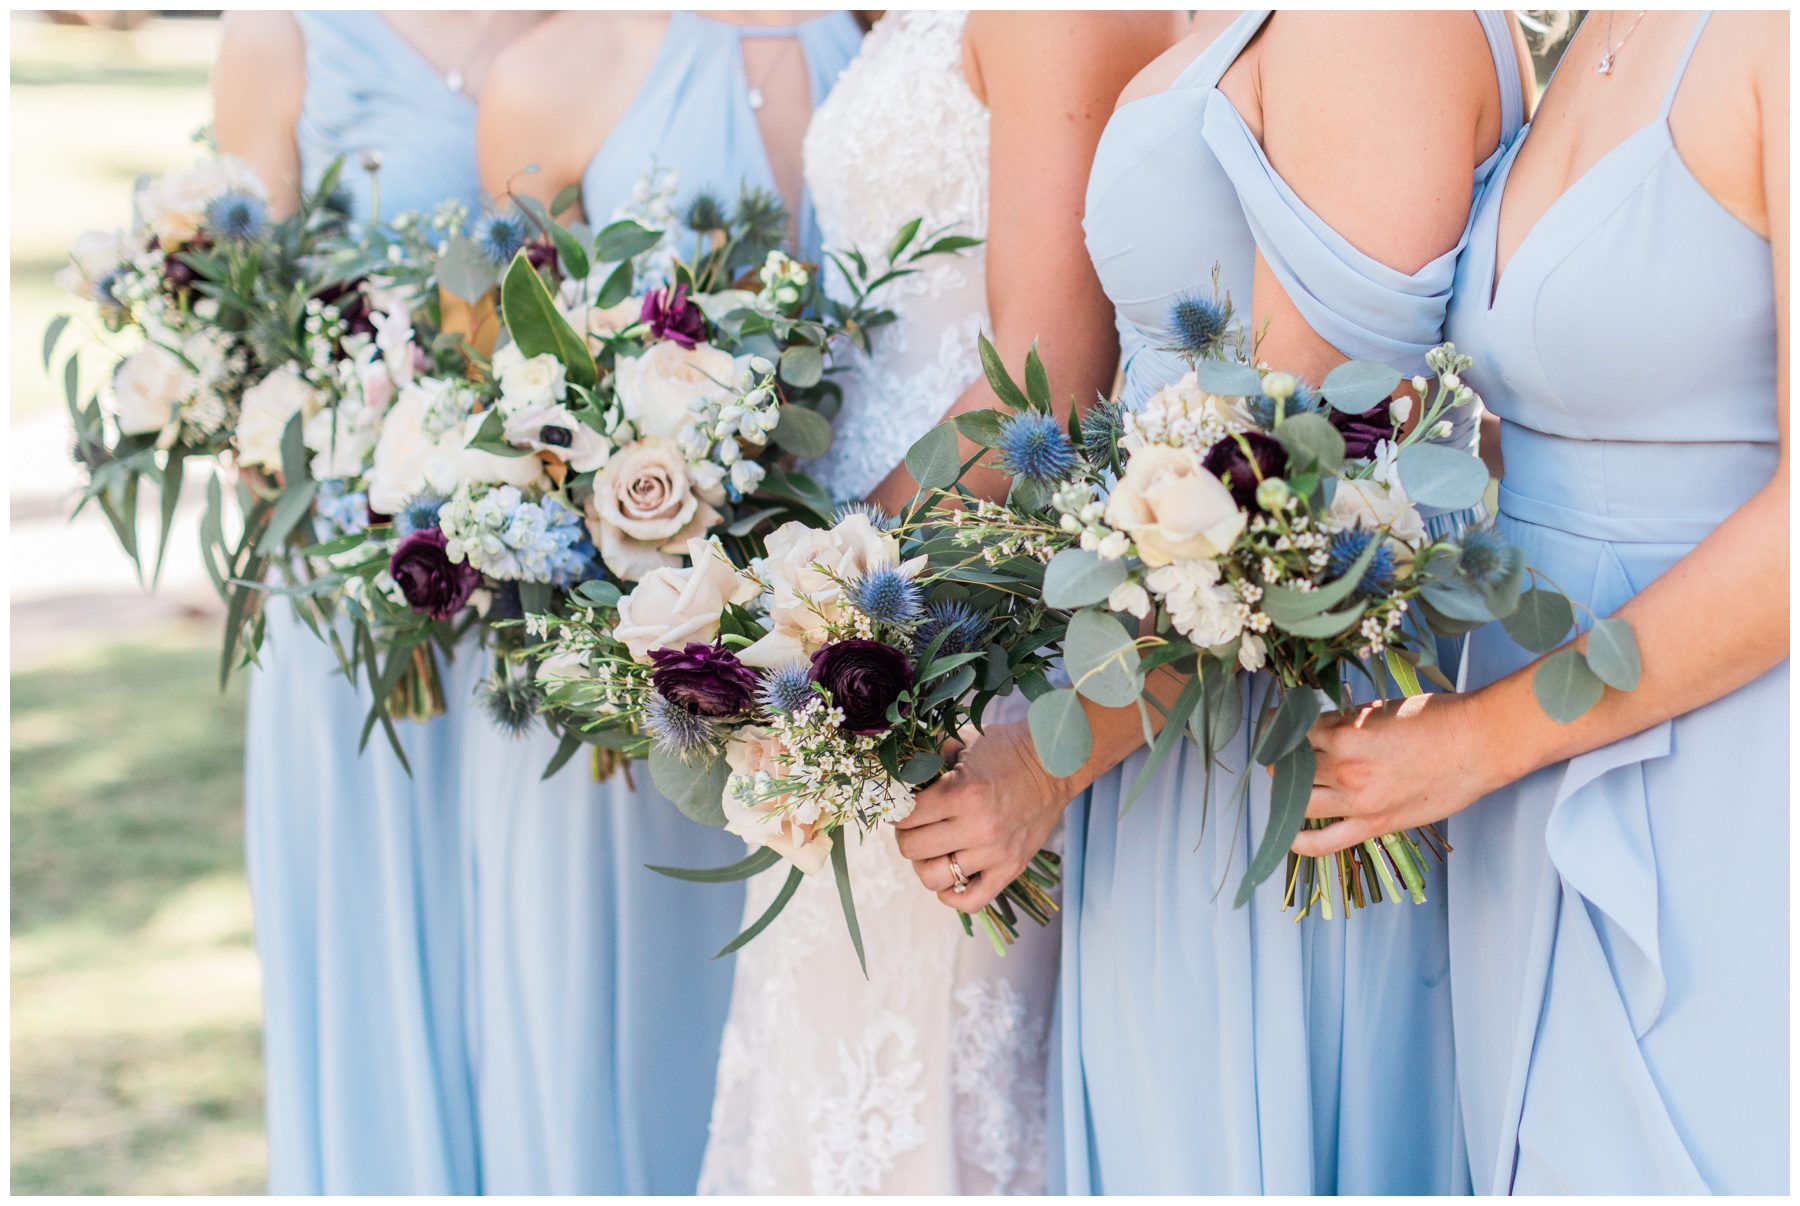 Bridal bouquet filled with pale pink roses, blue delphinium, and blue thistle by Urban Rubbish